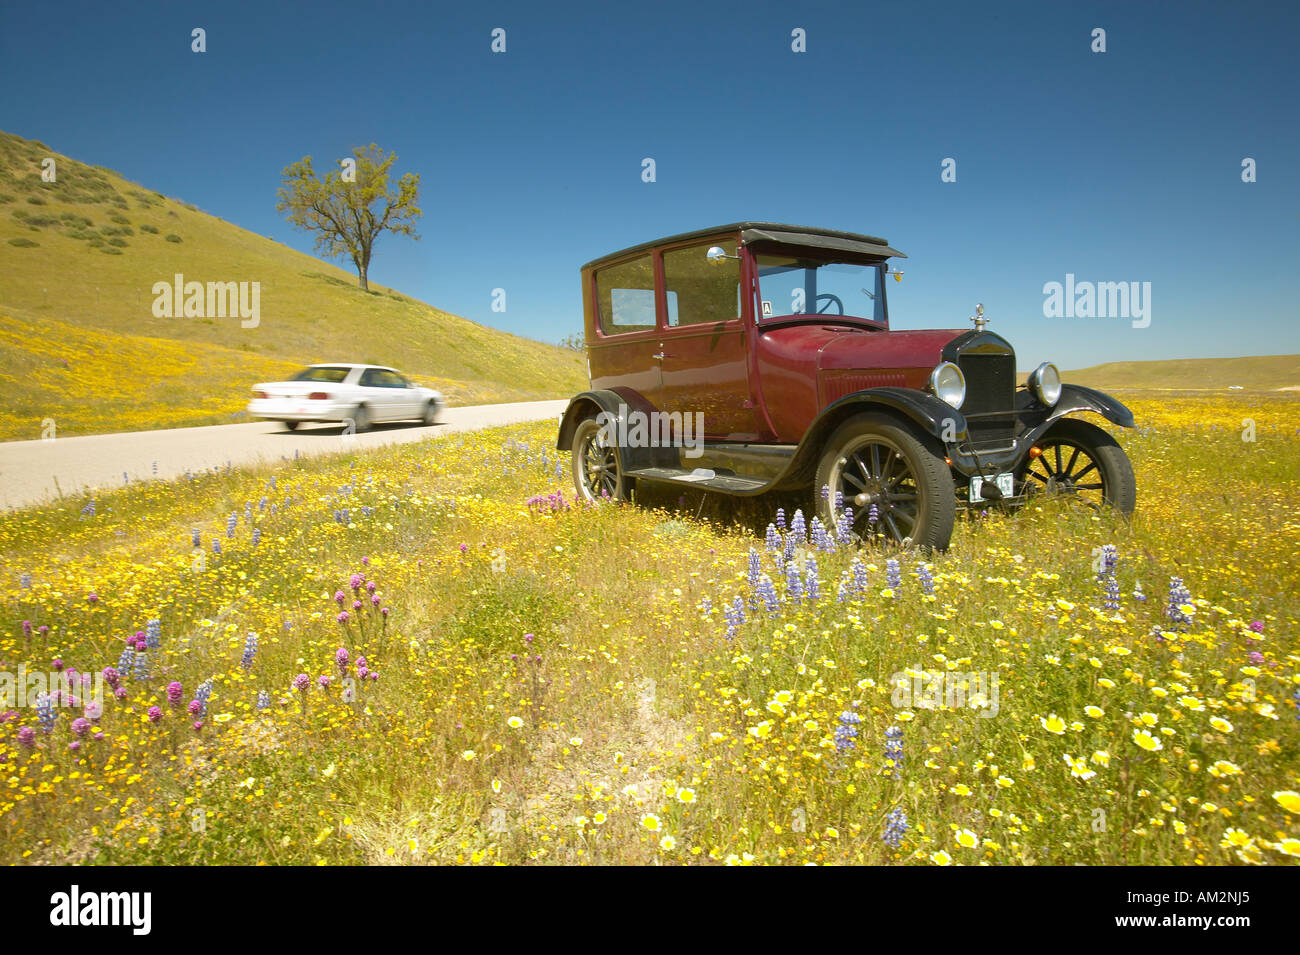 A modern car driving by a maroon Model T parked alongside a scenic road surrounded by spring flowers Route 58 Shell Road CA Stock Photo